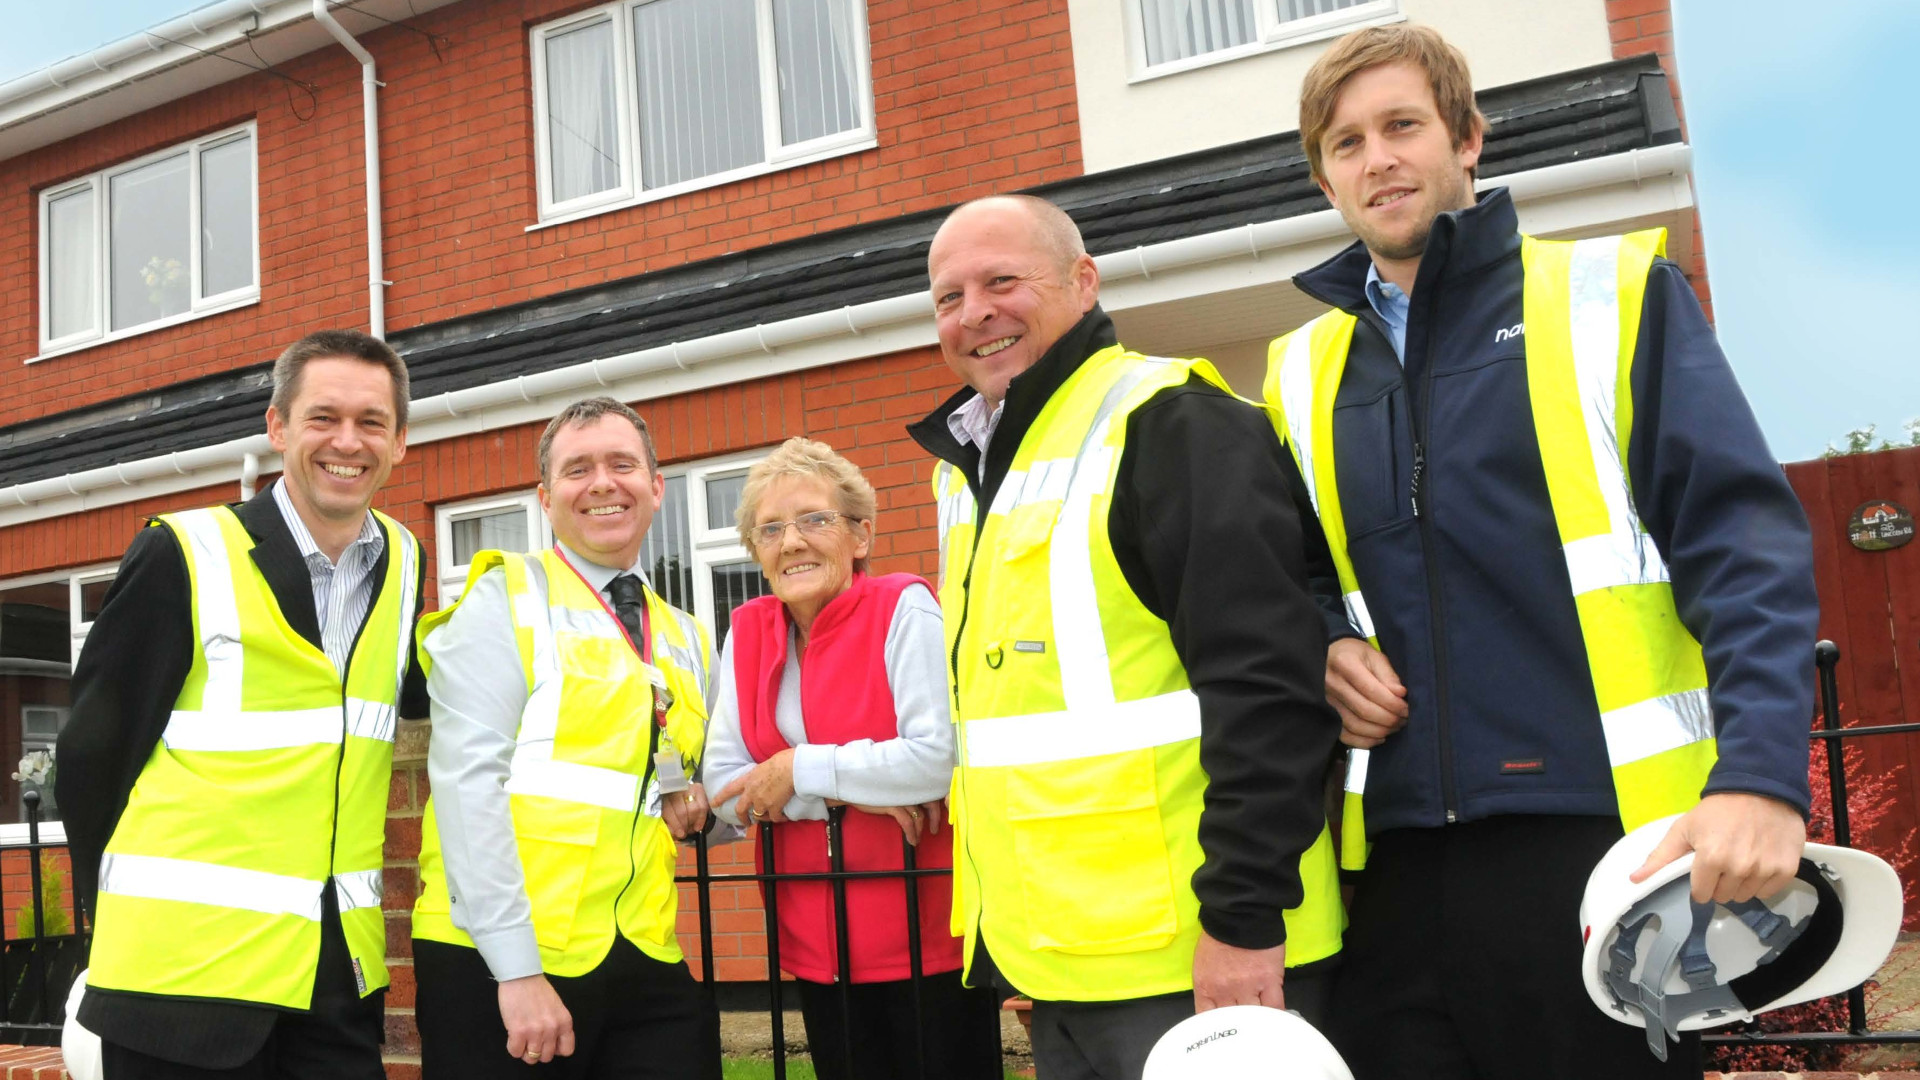 One of the improved homes, with representatives from South Tyneside Homes and the National Renewable Energy Centre